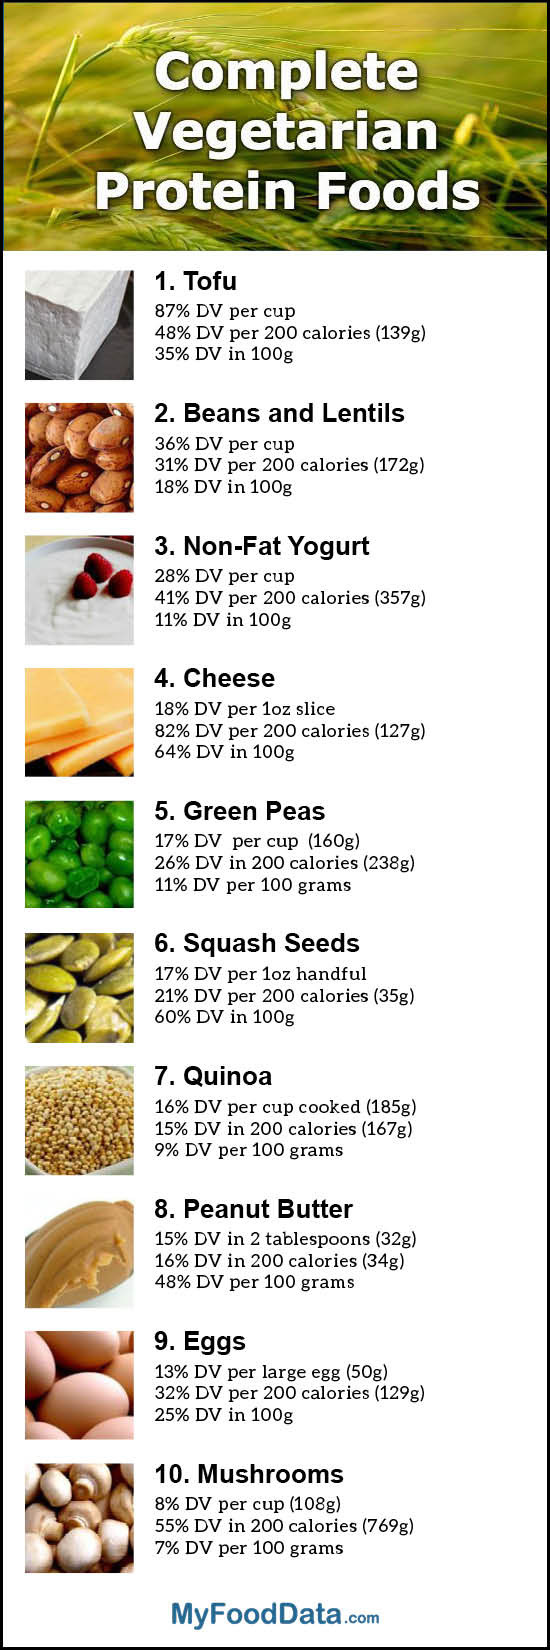 High Protein Foods Vegetarian
 Top 10 plete Ve arian Protein Foods with All the